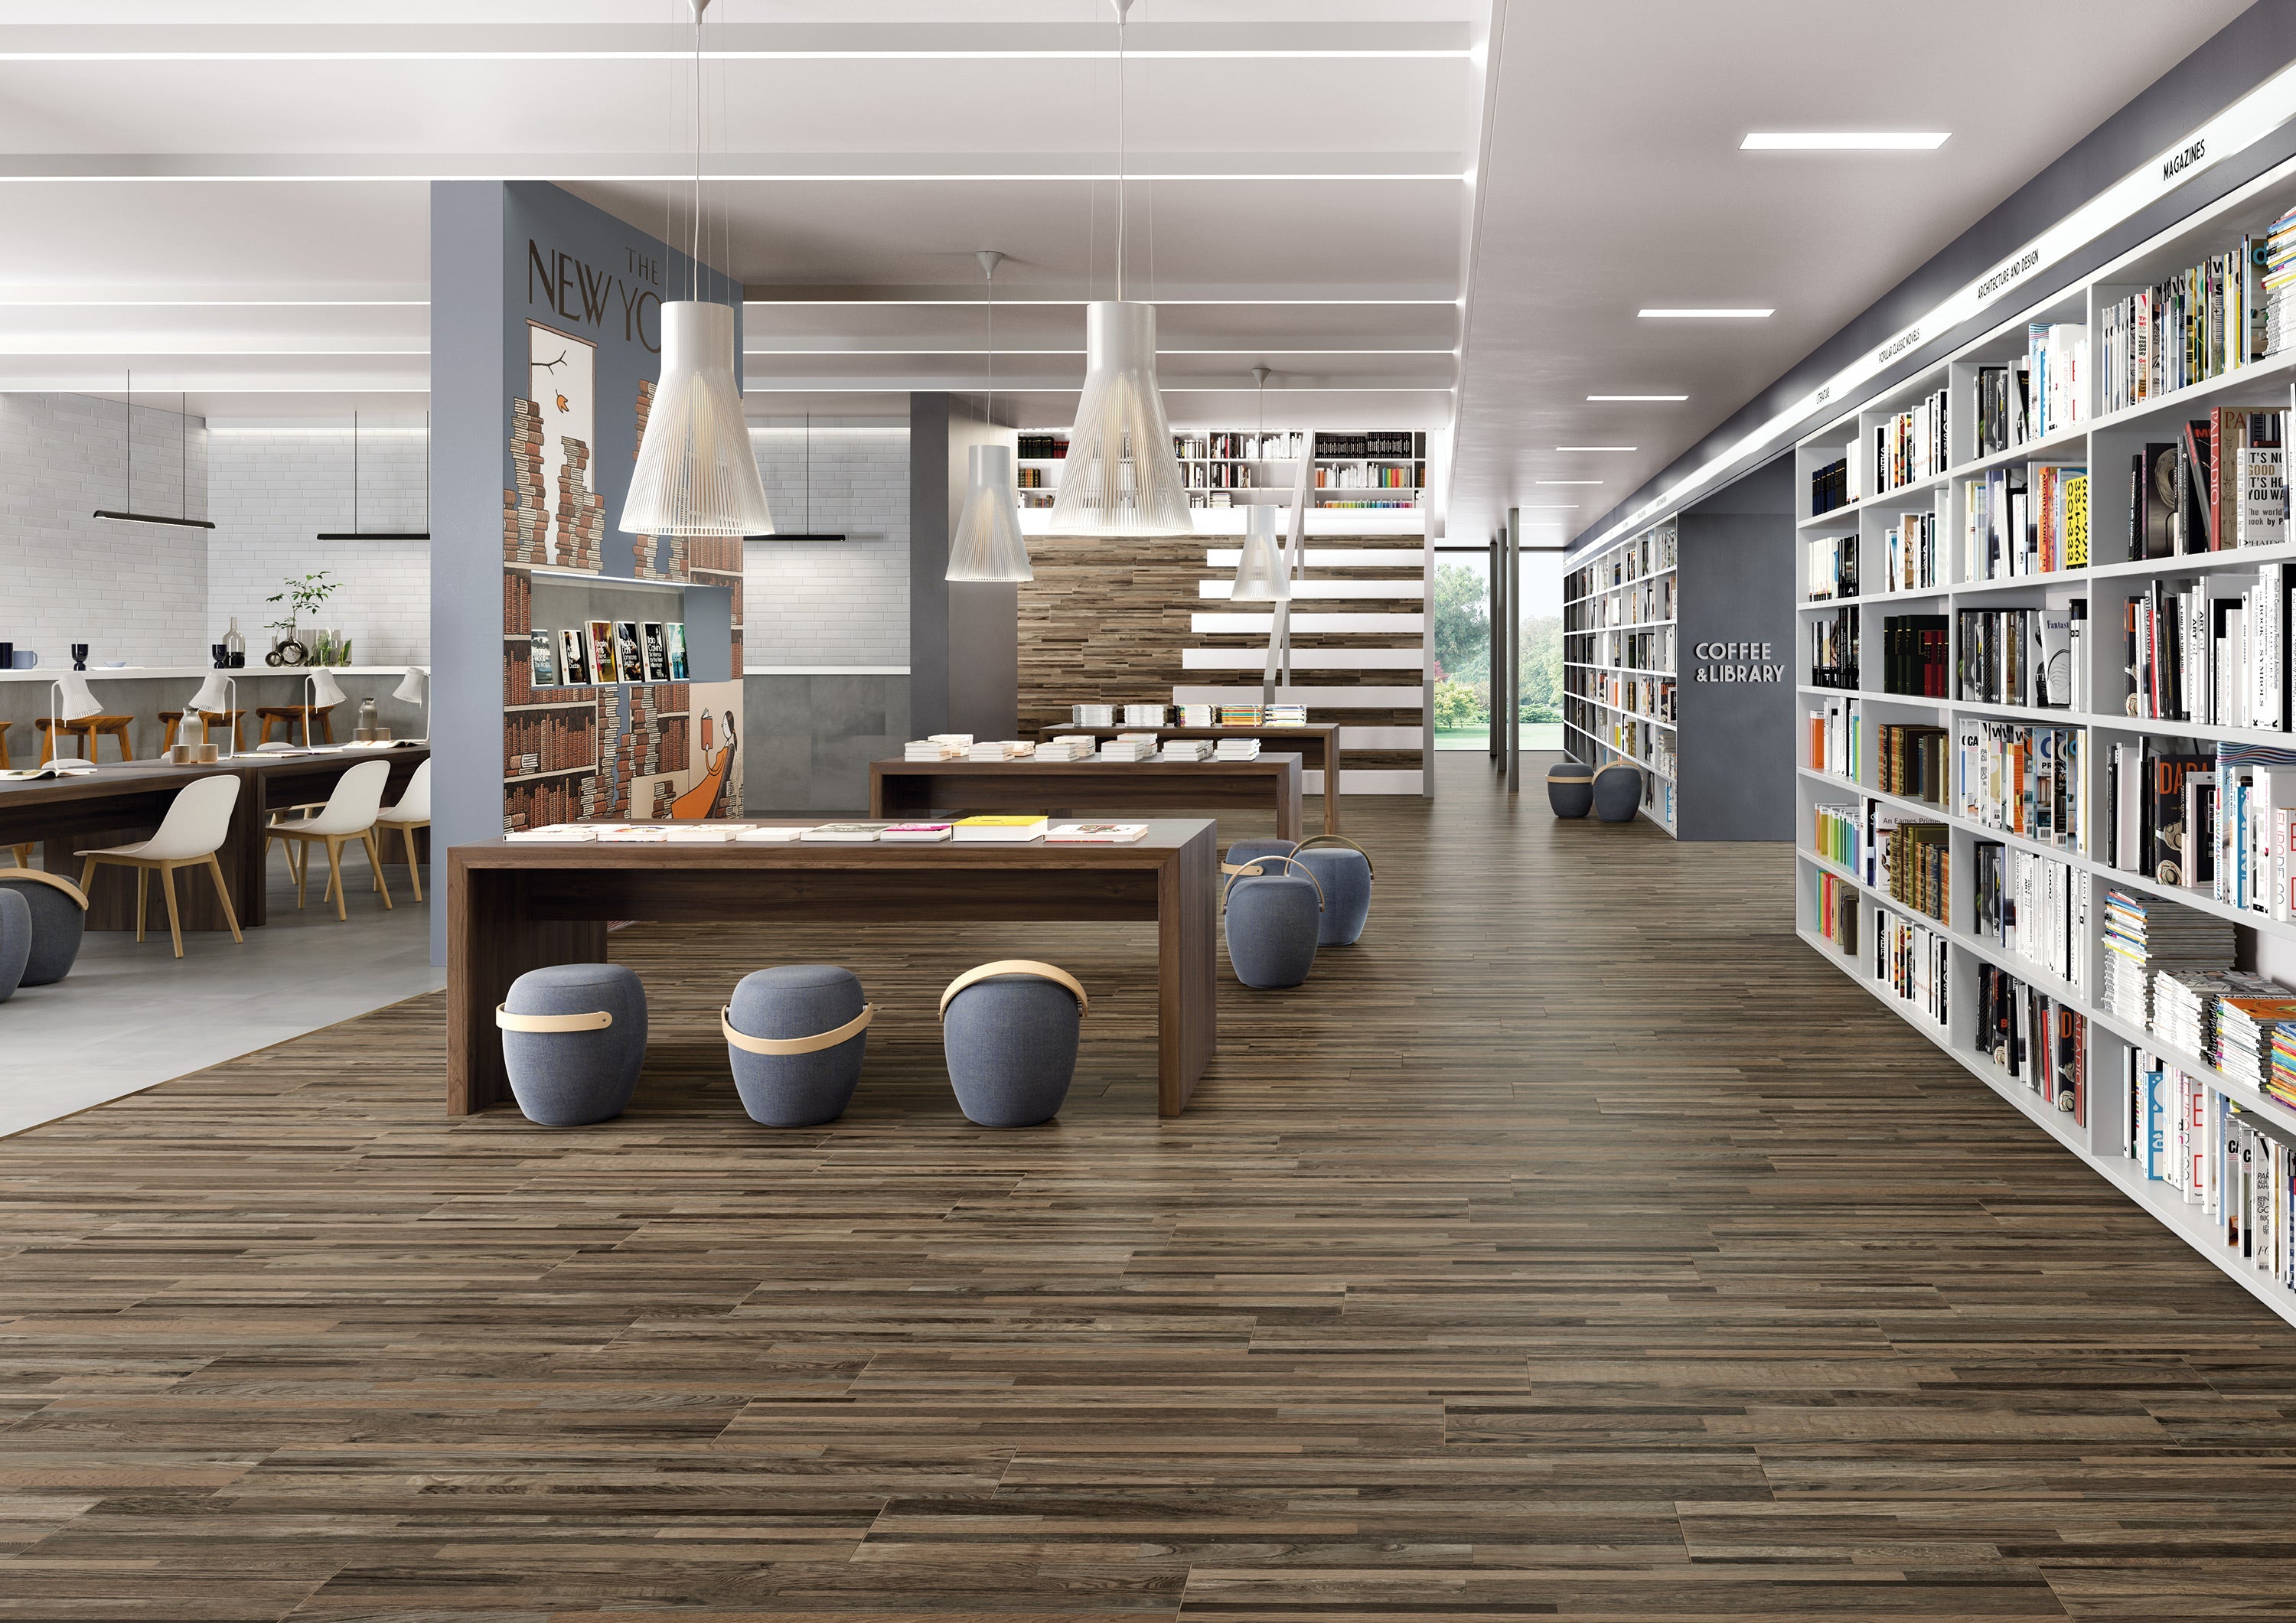 Porcelain tile flooring from Surface Group's Vision Collection in a modern library setting with wood-like finish.